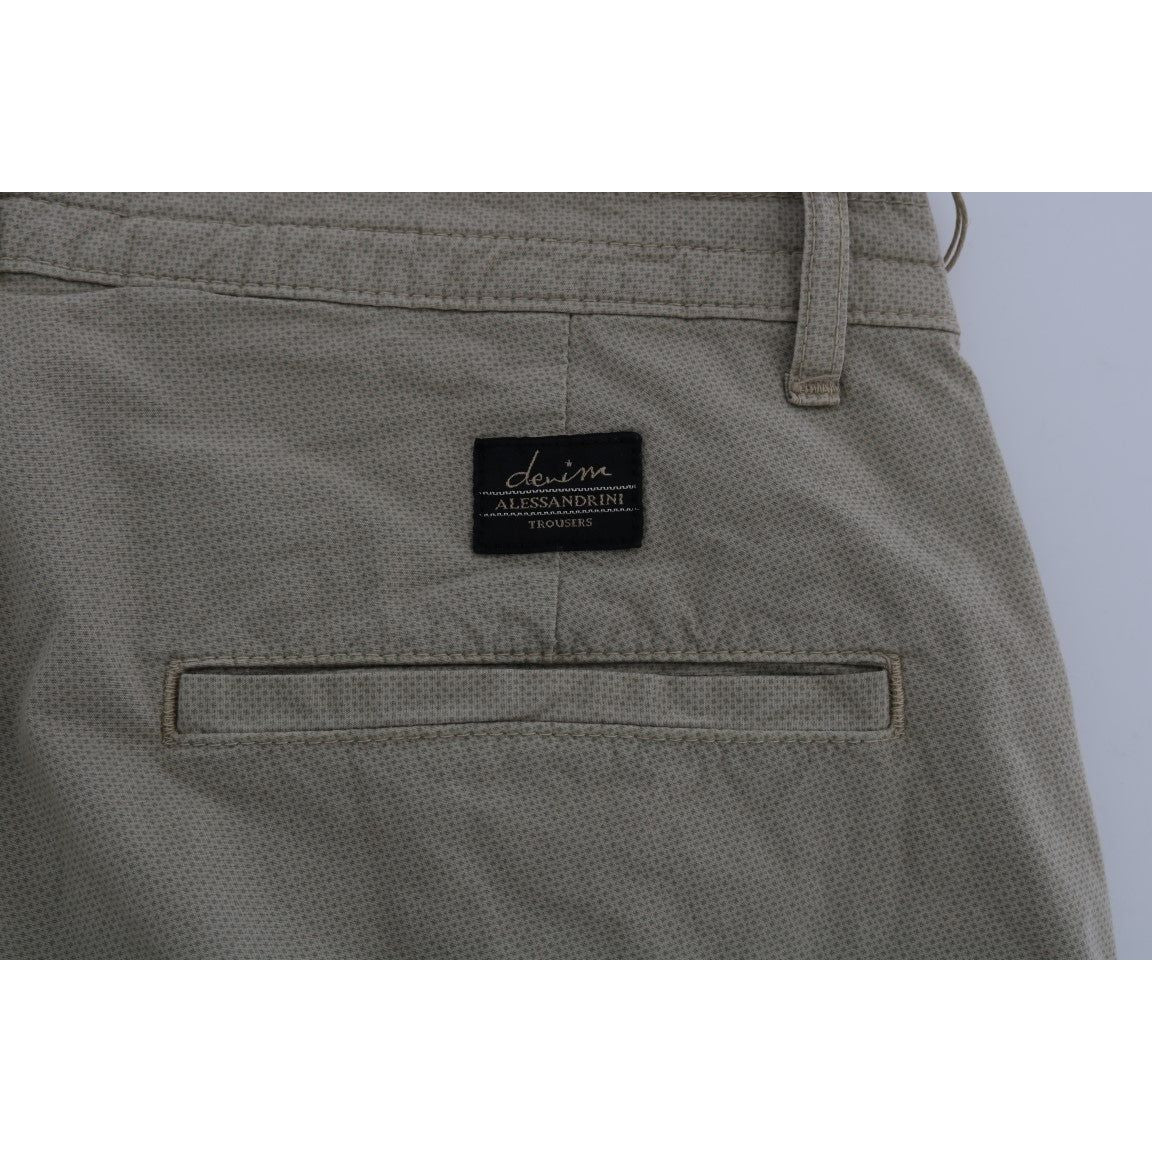 Daniele Alessandrini Beige Slim Fit Chinos for Sophisticated Style Jeans & Pants beige-cotton-stretch-slim-fit-chinos